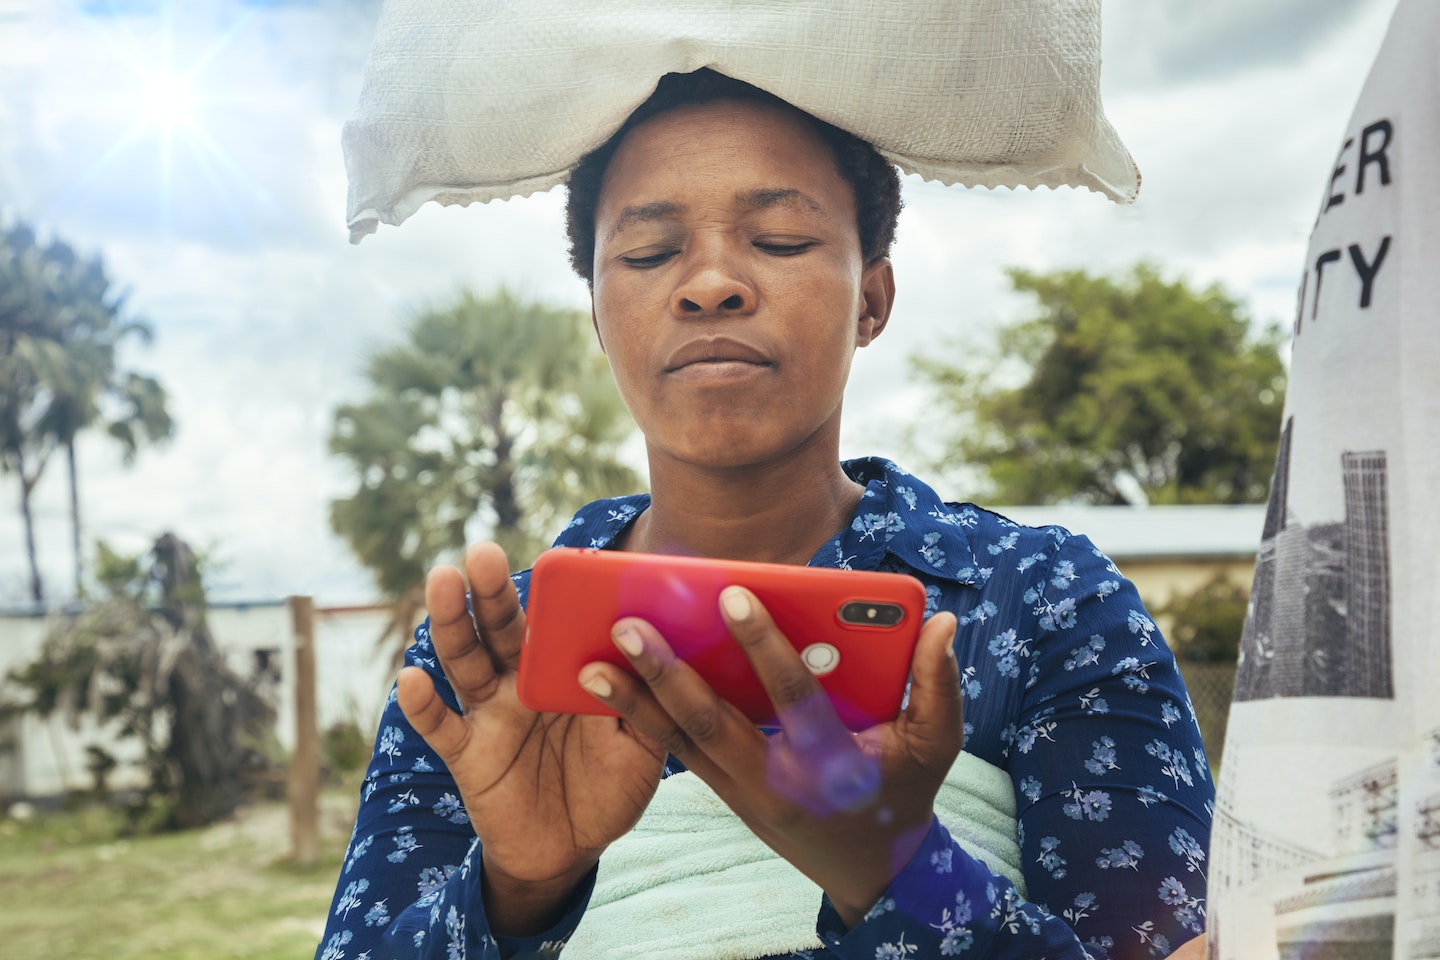 Mobiles often provide the only internet access in low and middle income countries. Picture by poco_bw on iStockPhoto